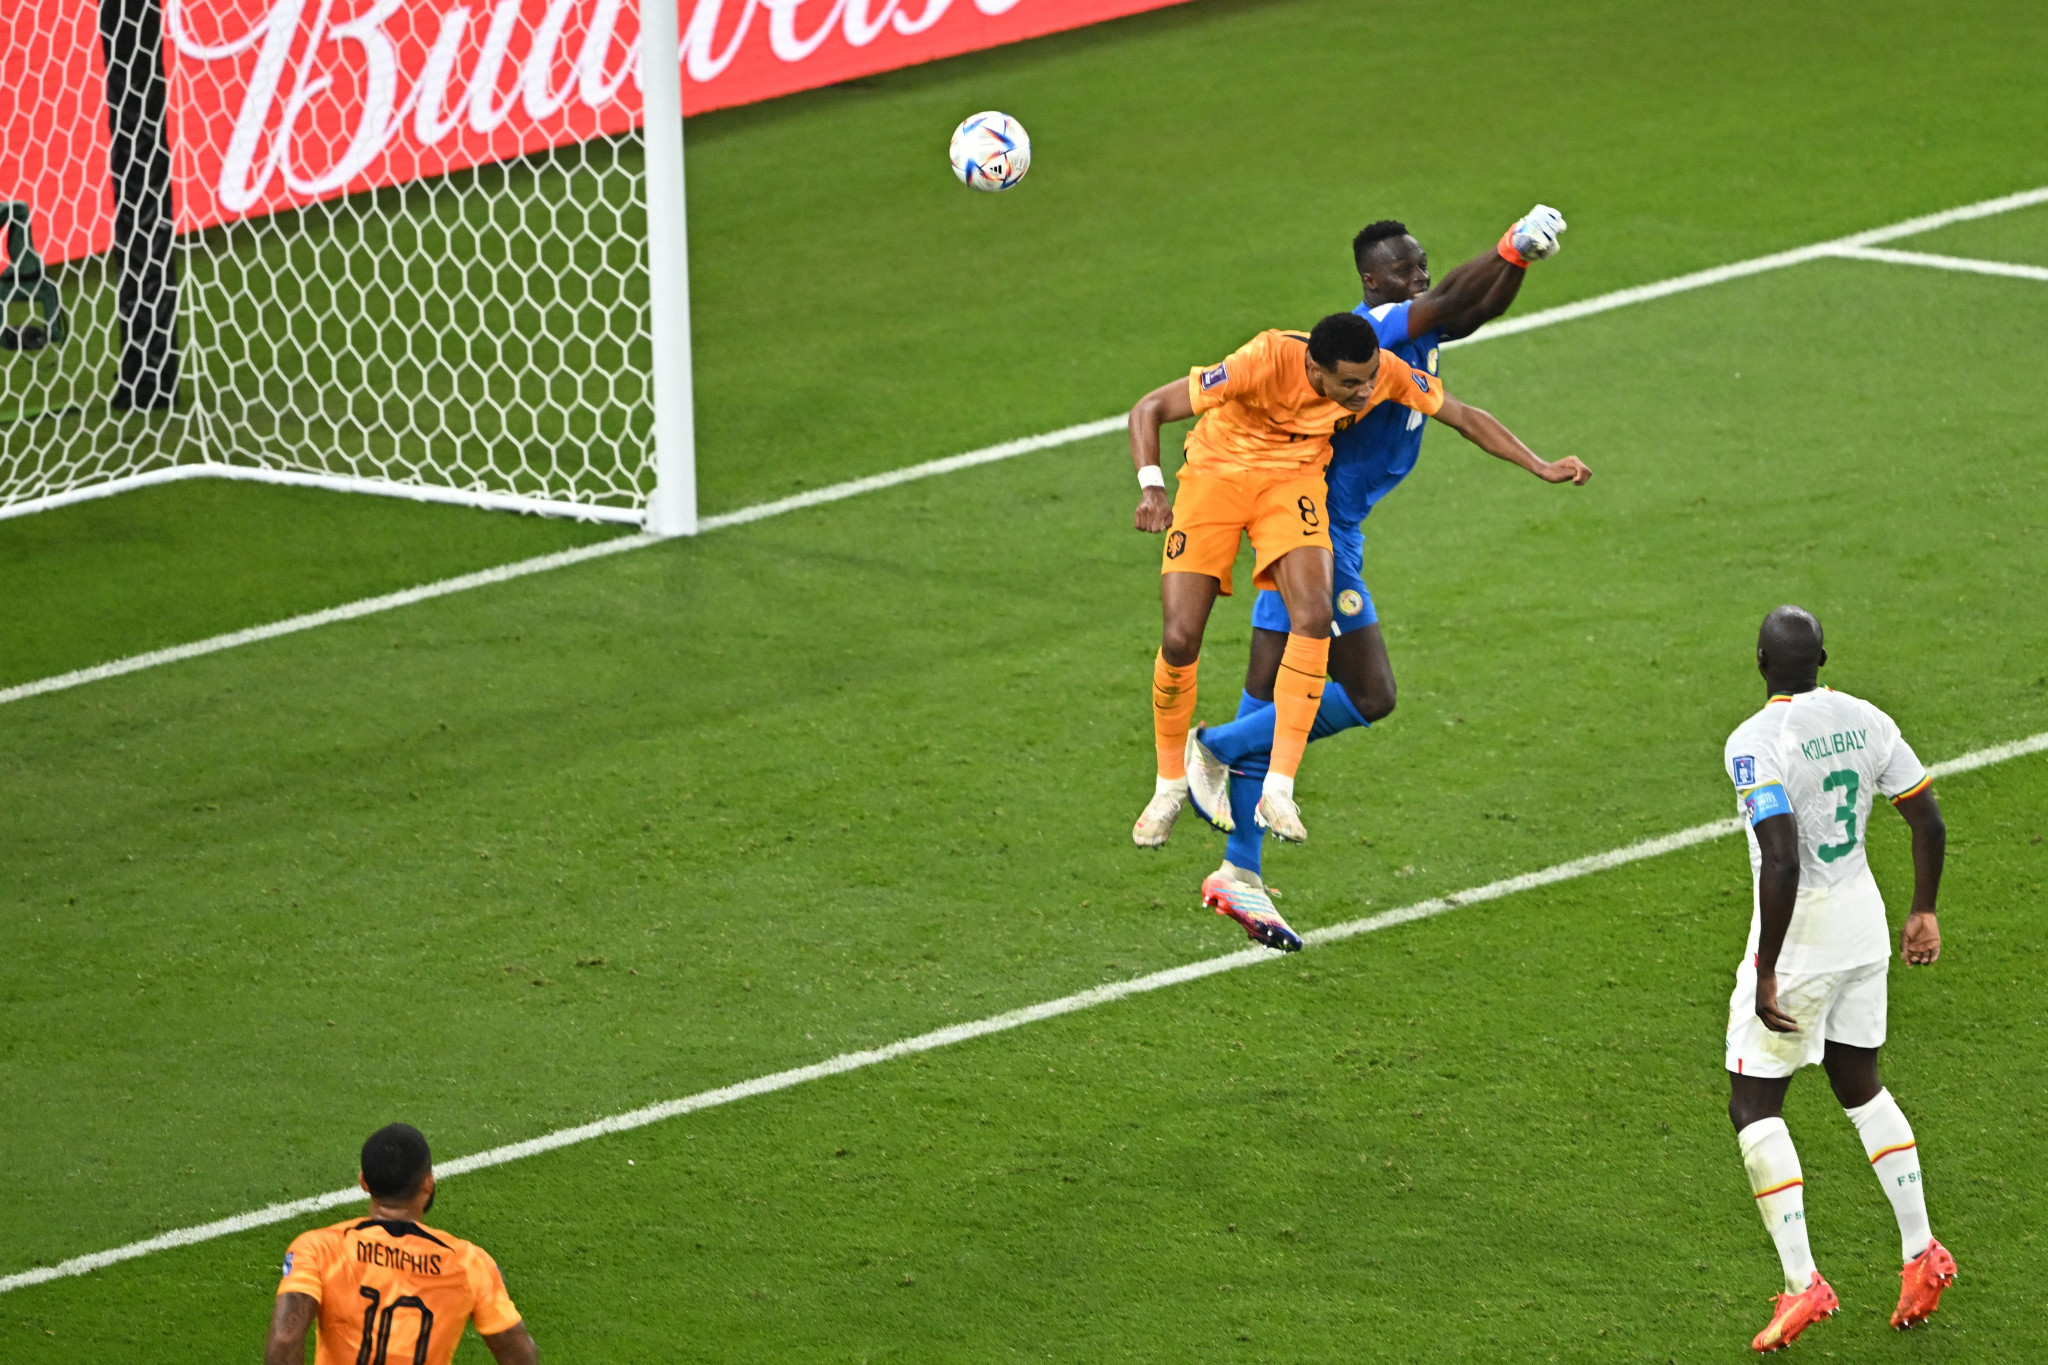 Cody Gakpo beat Senegalese goalkeeper Edouard Mendy to the ball to draw first blood for the Dutch ©Getty Images